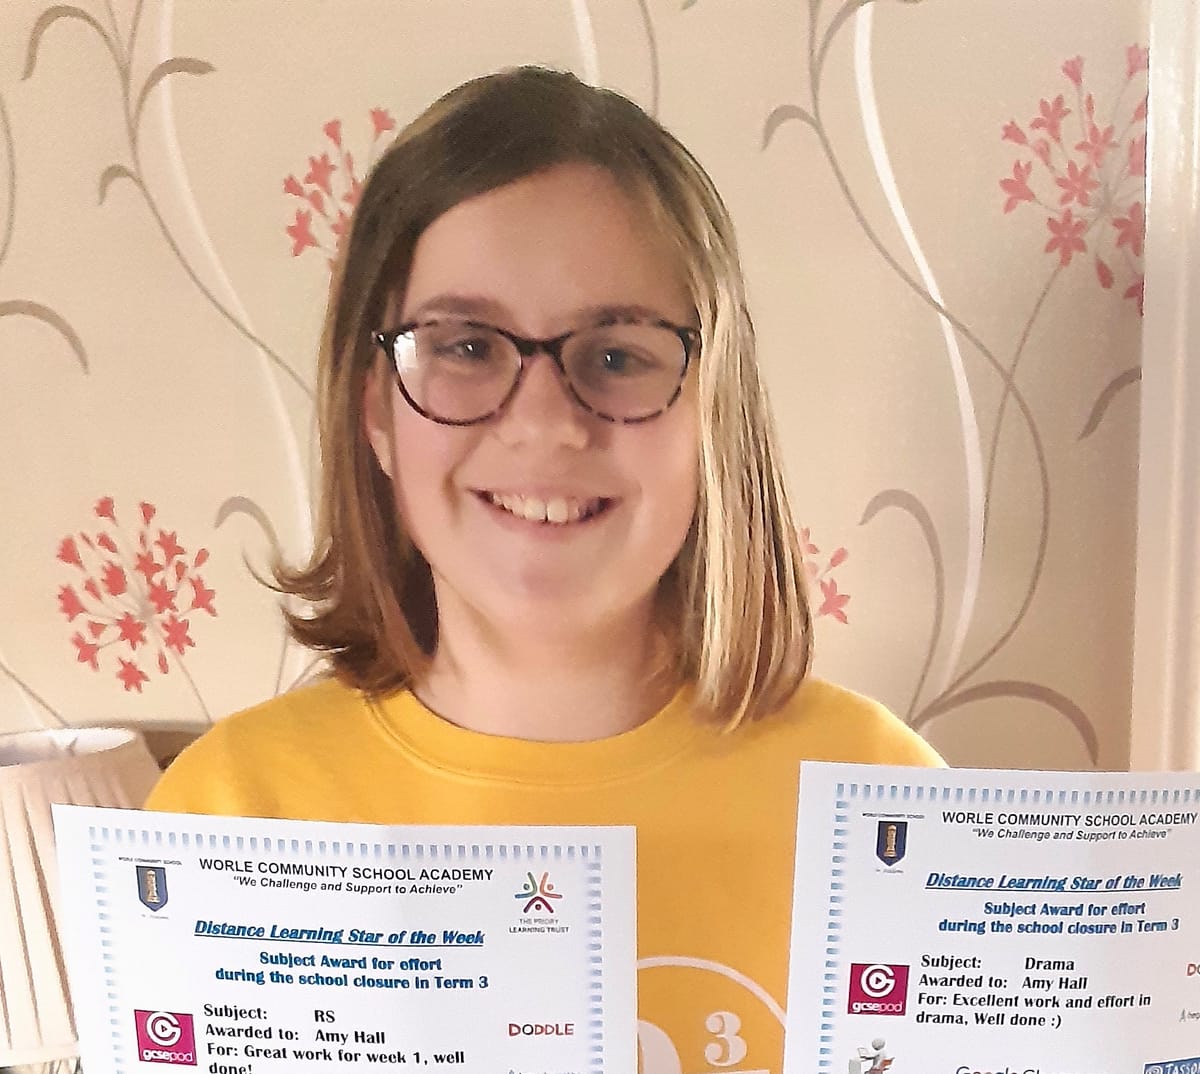 Amy, Beth and Chace praised as ‘Learning Stars’ alongside hundreds of students